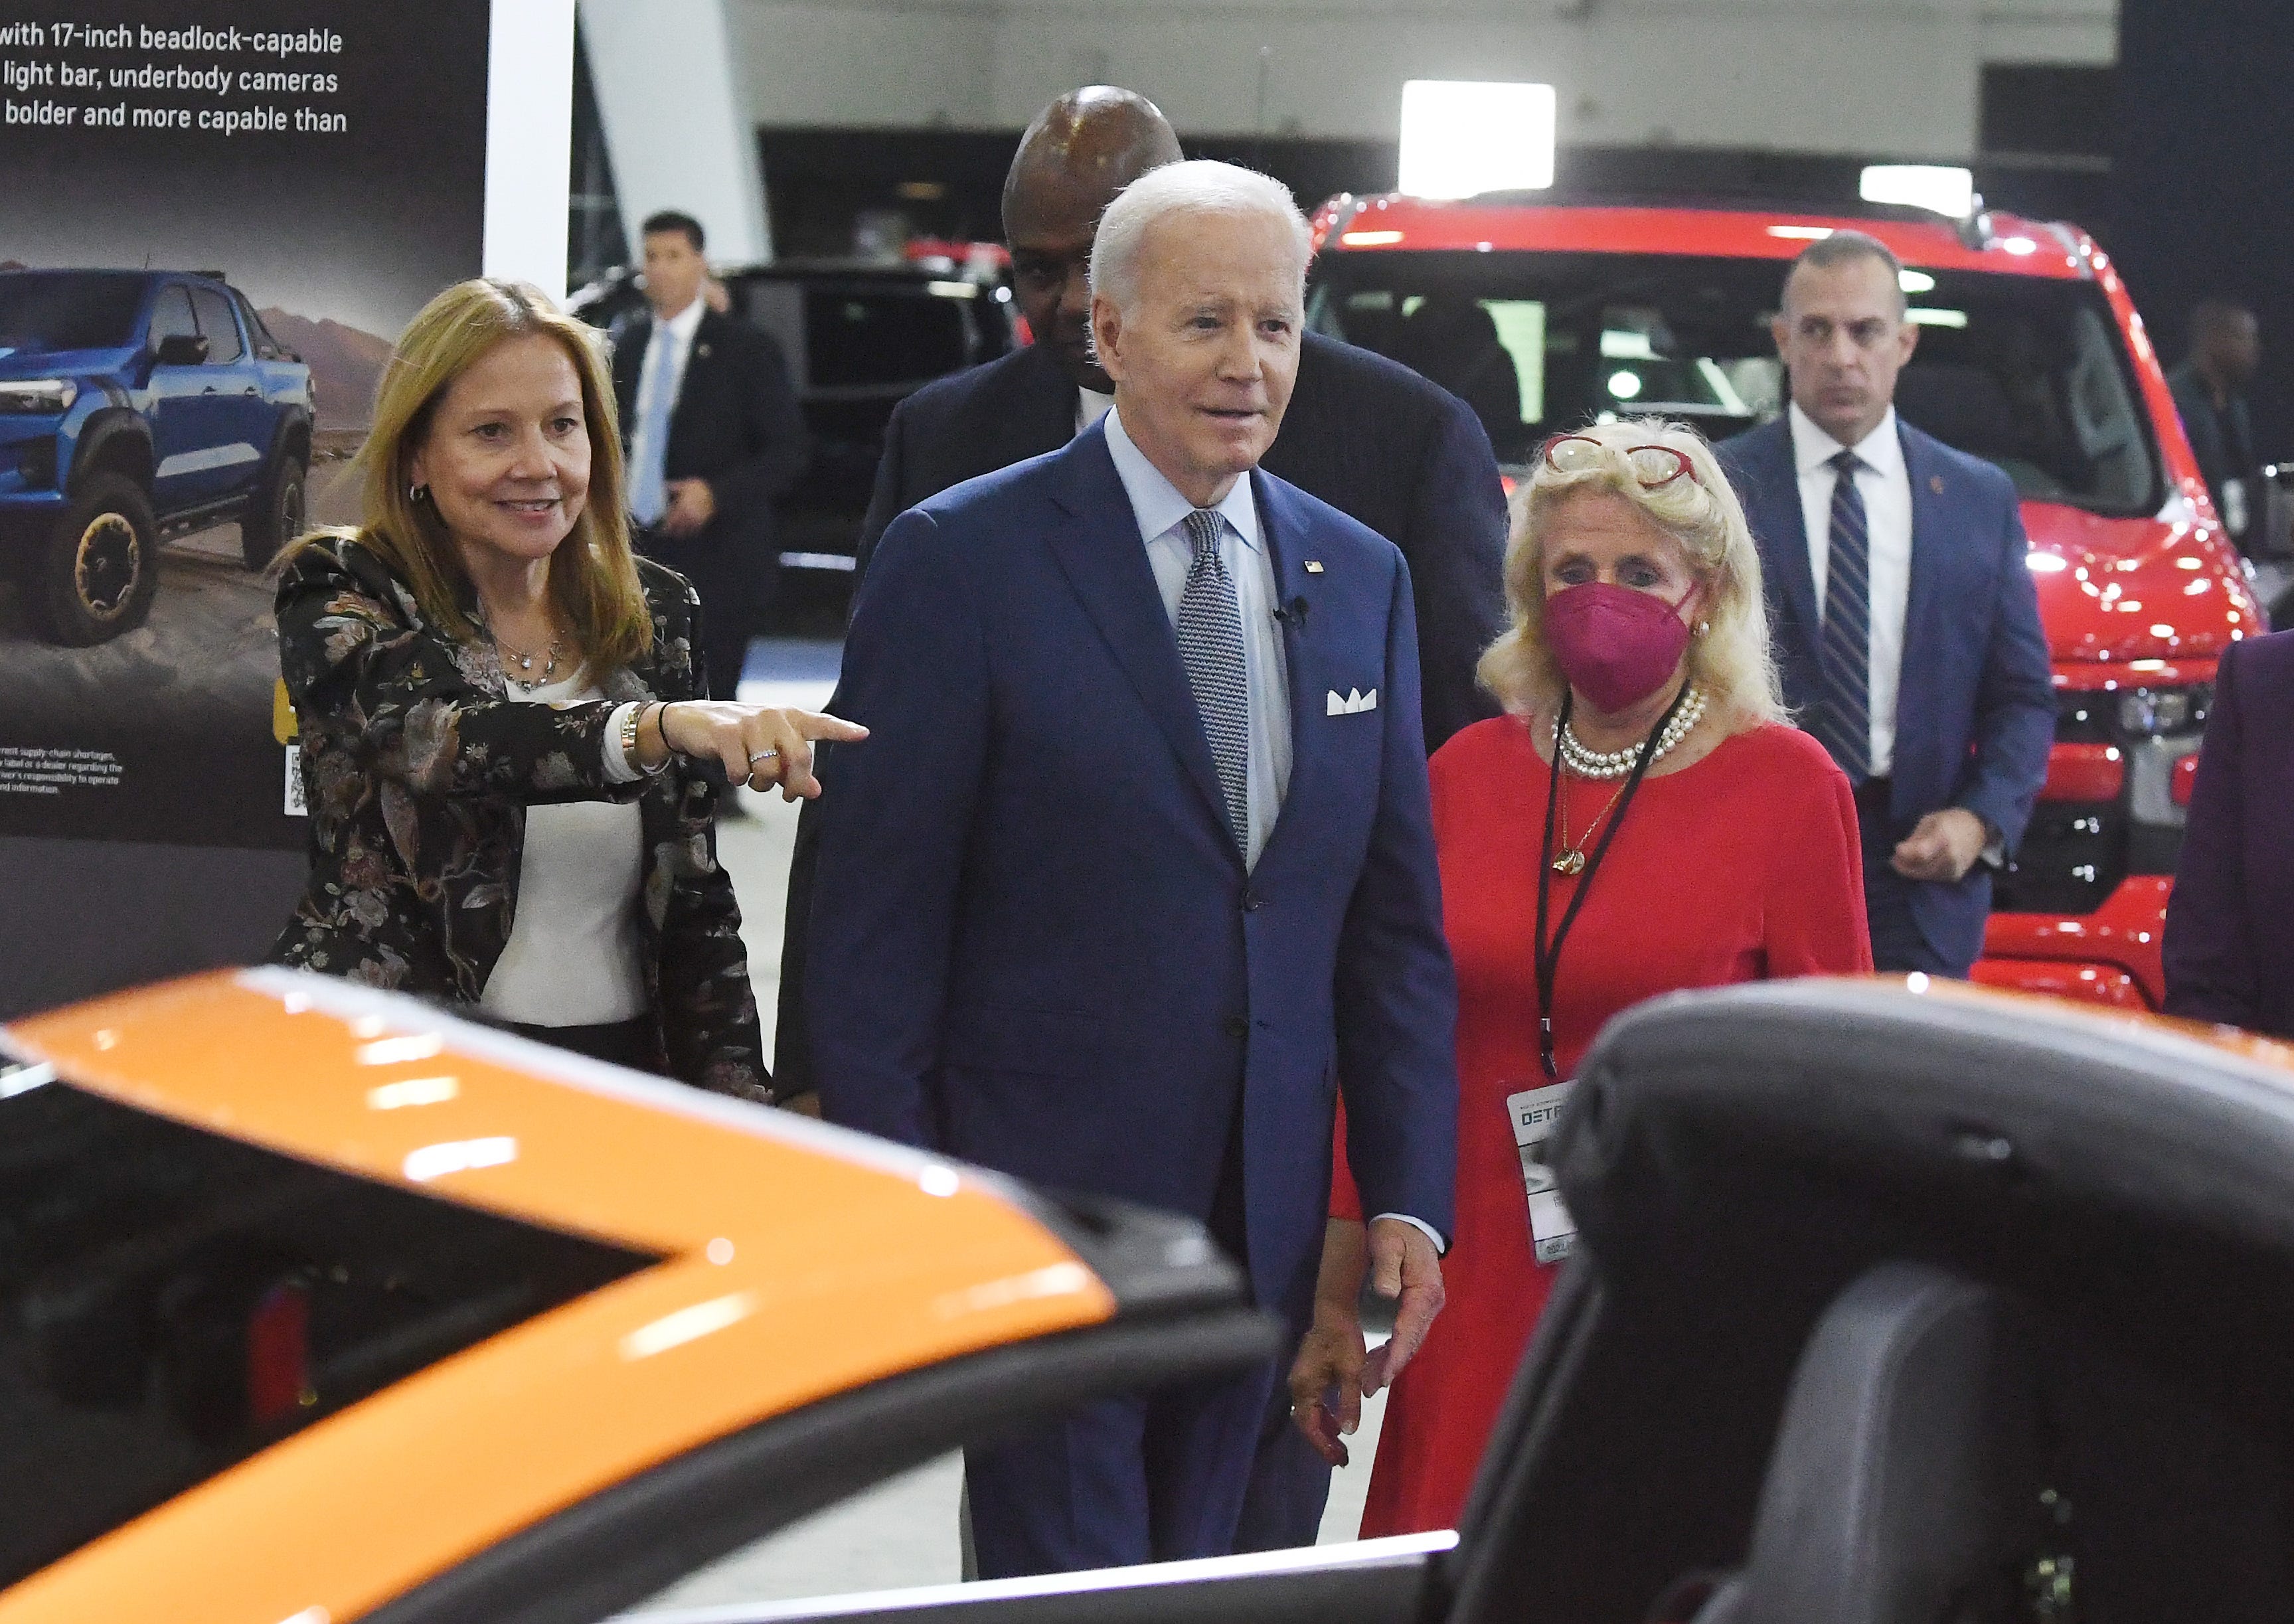 General Motors chair and chief executive officer Mary Barra shows President Joe Biden a blazing orange Corvette, with U.S. Representative Debbie Dingell, at the GM display during a tour of the 2022 North American International Auto Show in Detroit, Michigan on September 14, 2022.